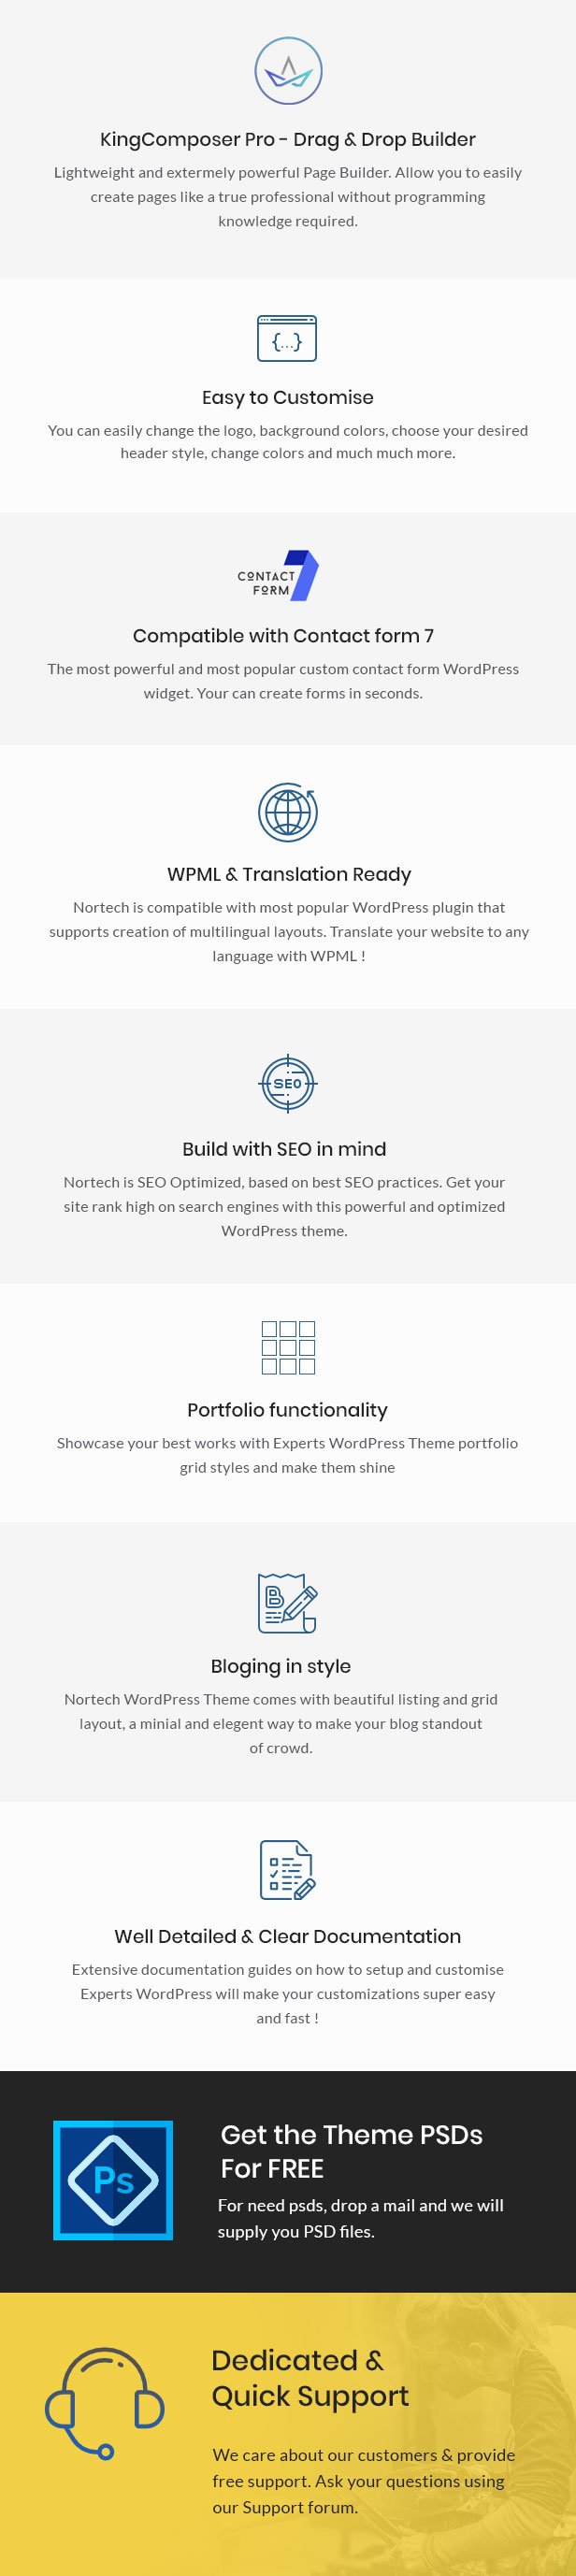 Nortech - A Industry and Engineering WordPress Theme - 2